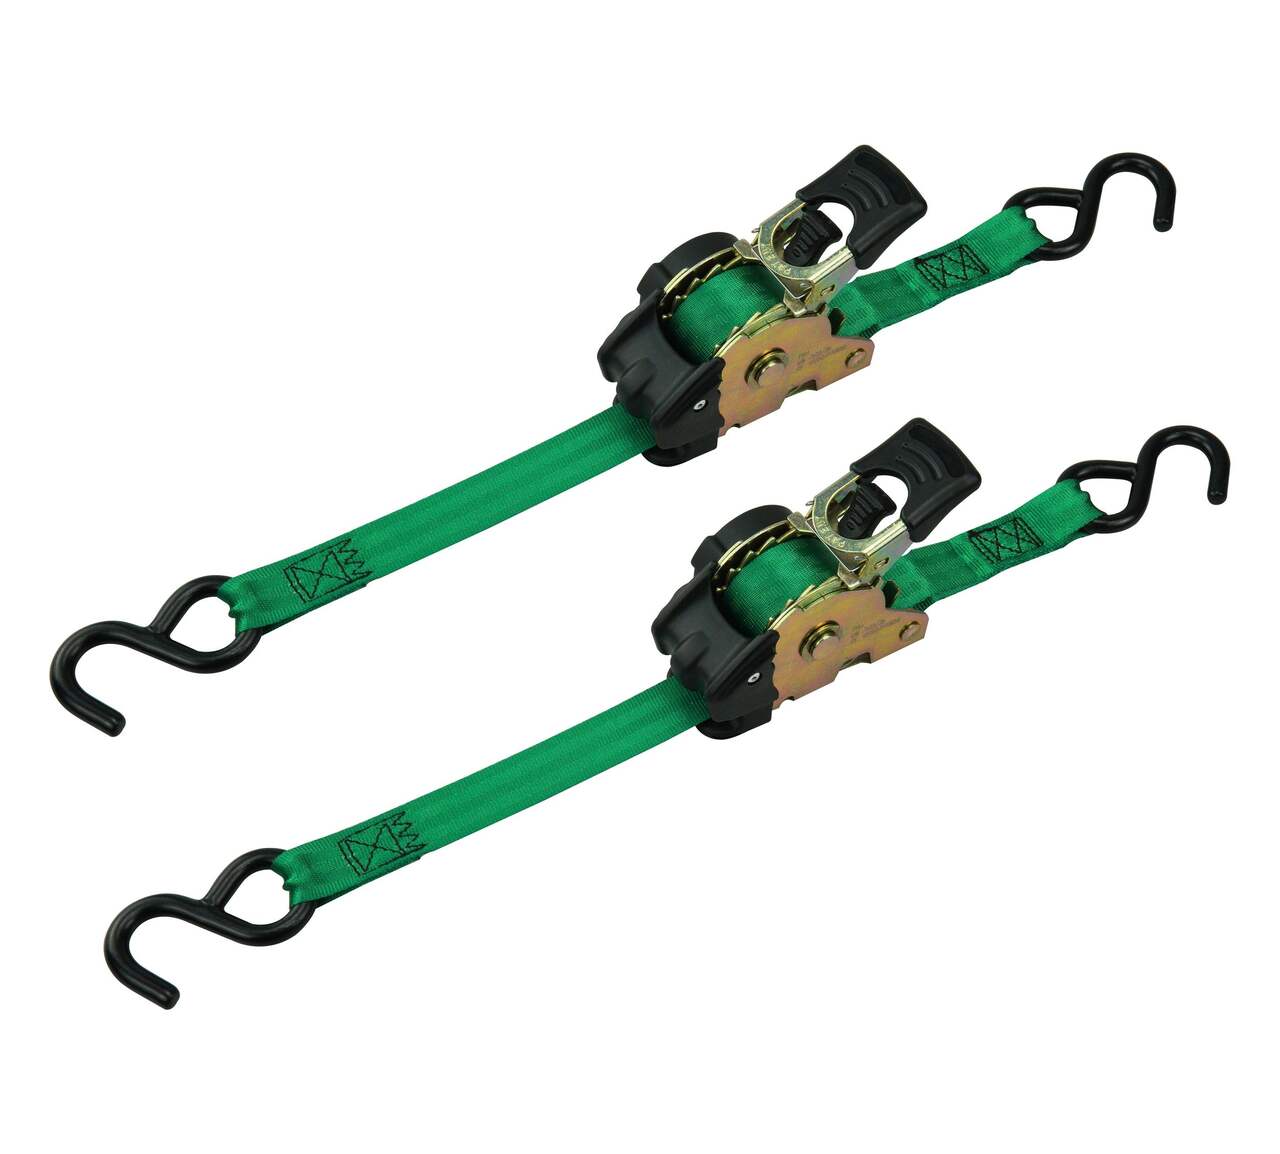 https://media-www.canadiantire.ca/product/automotive/automotive-outdoor-adventure/tarps-cords/0402921/1-200-lb-10-retractable-tie-down-2-pack-9fe36aa8-d3c0-4d8f-bf92-46830a931781-jpgrendition.jpg?imdensity=1&imwidth=640&impolicy=mZoom